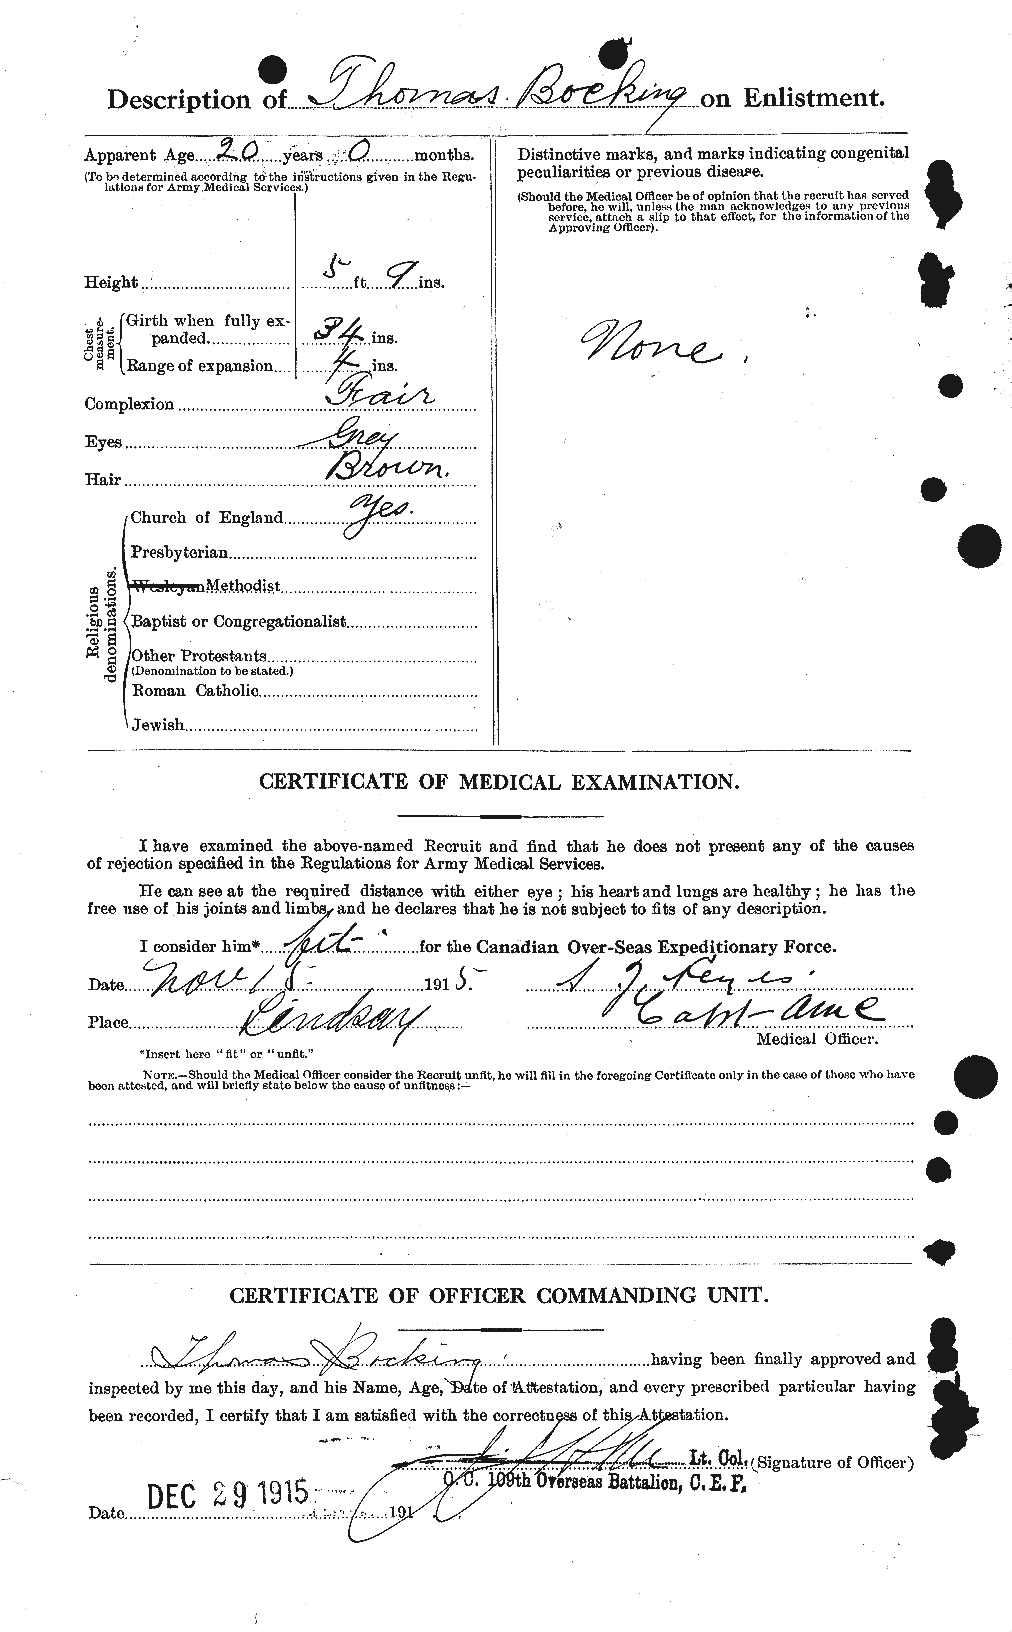 Personnel Records of the First World War - CEF 245288b